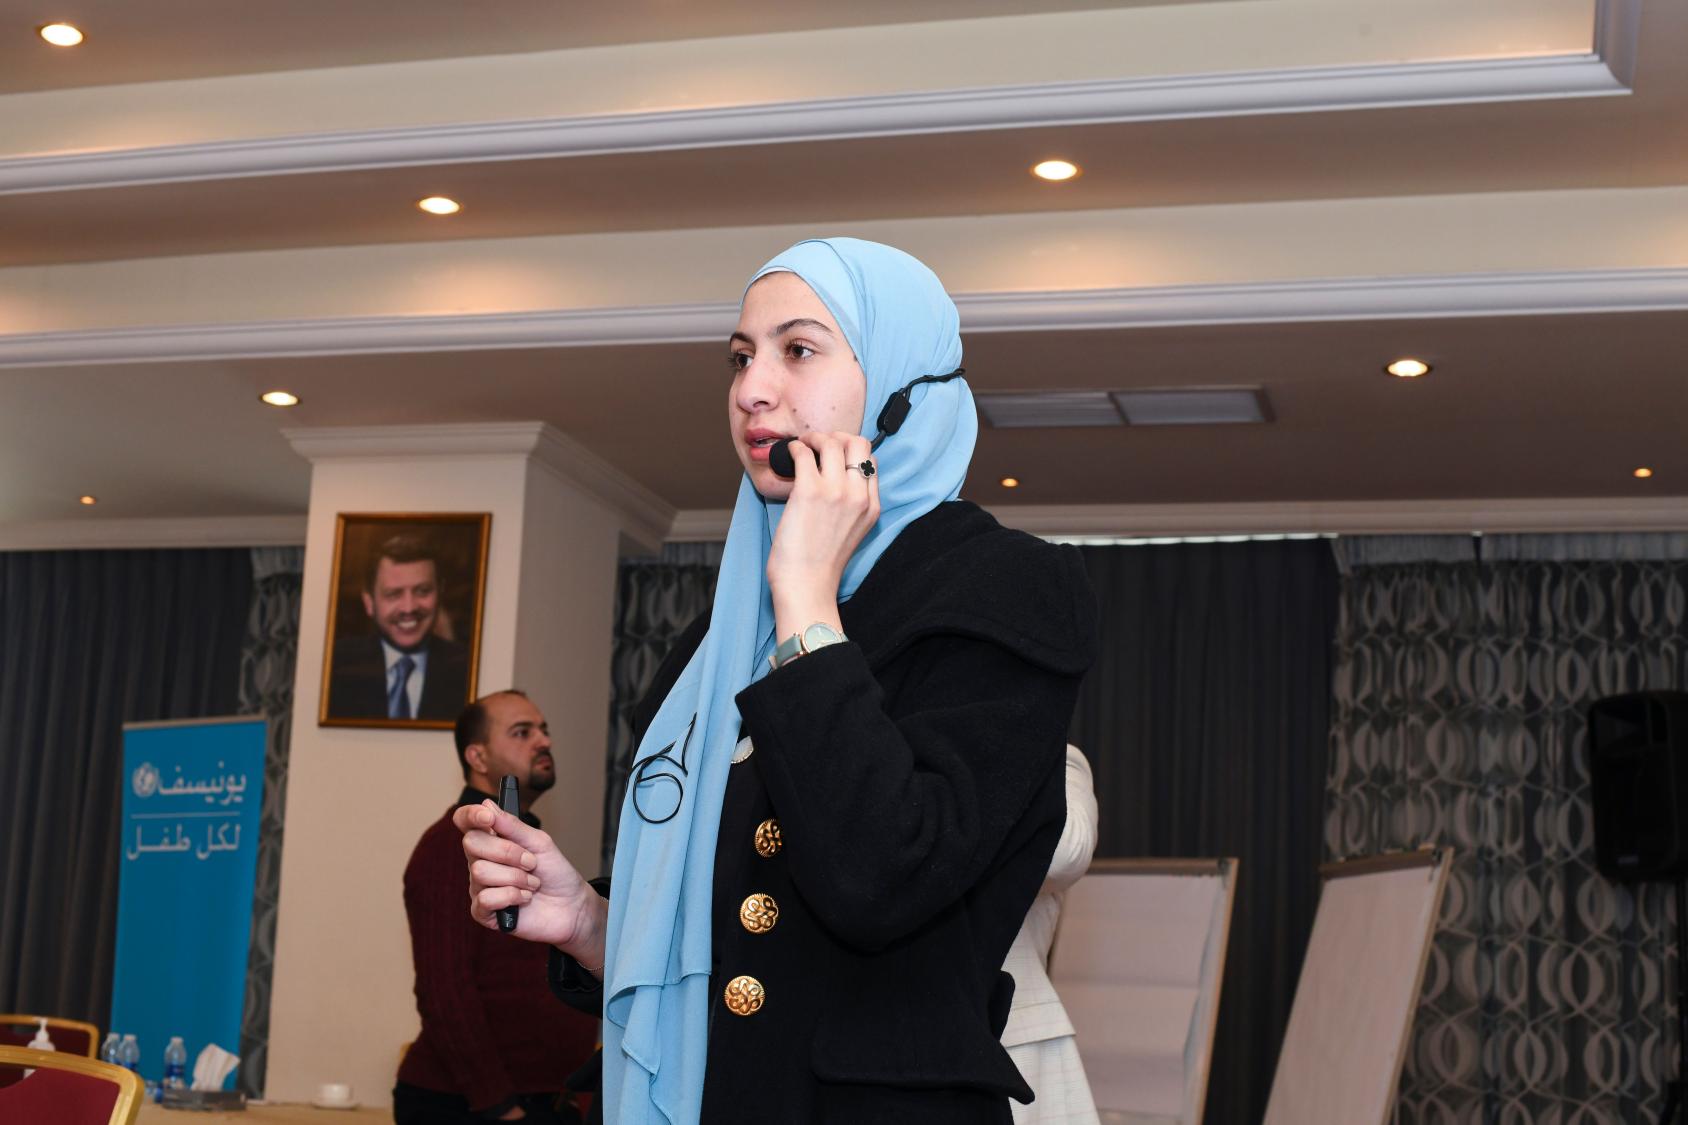 Fatima, a participant in the joint WFP-UNICEF youth innovation project in Jordan.